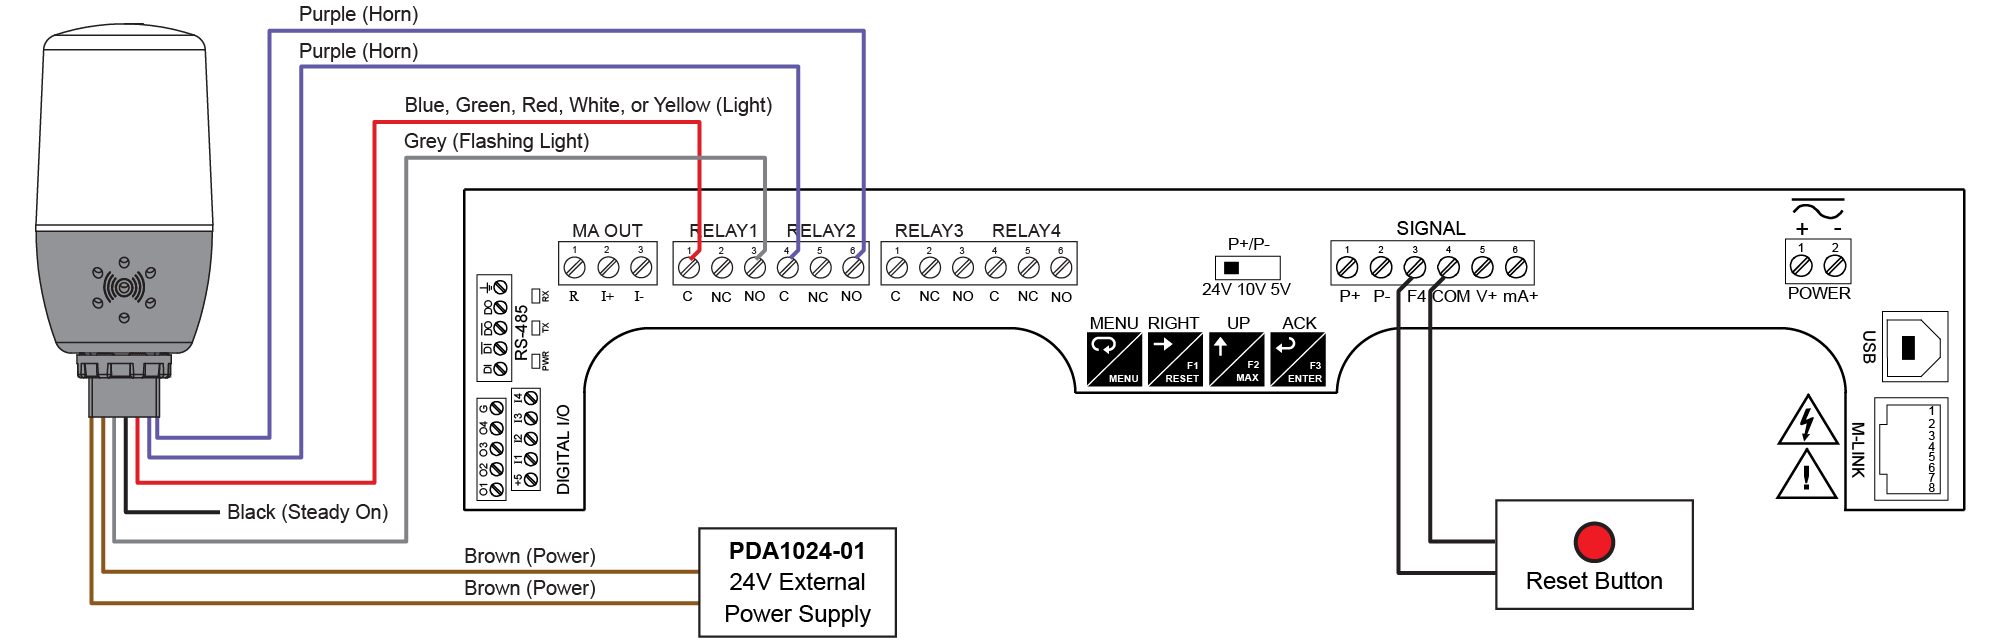 Wiring Connections for MOD-PD2LH Models Using PDA1024-01 External Power Supply